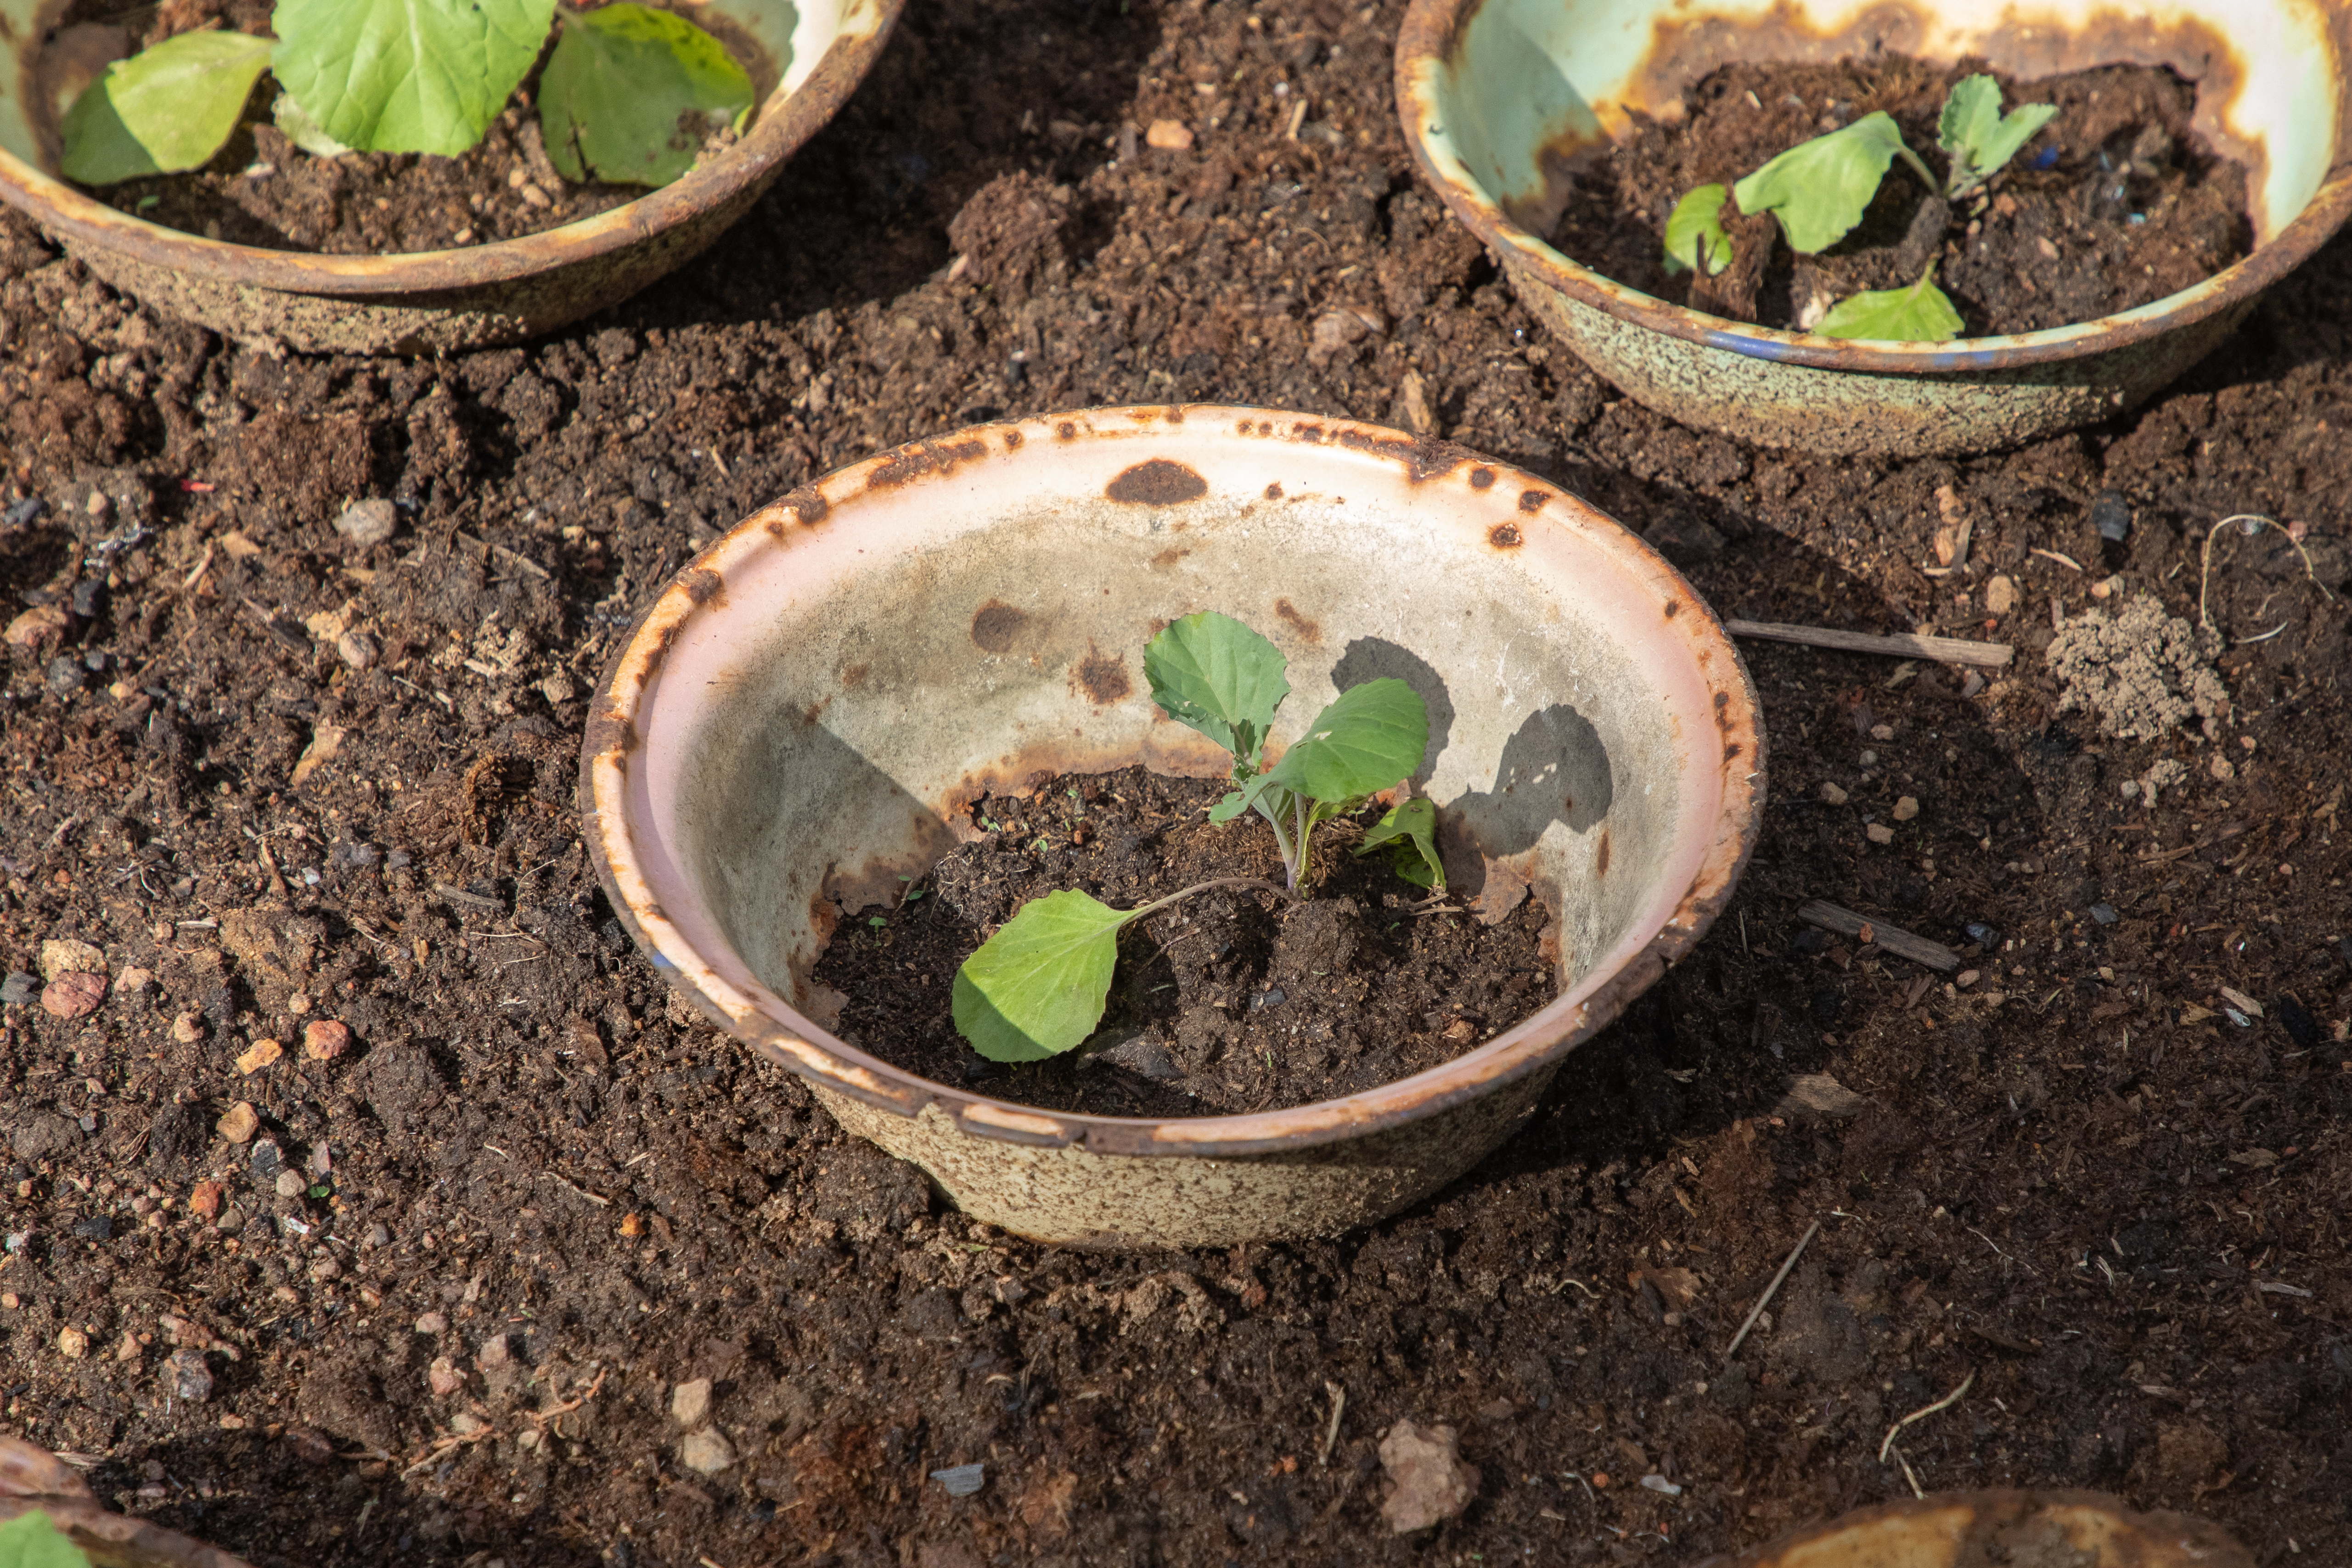 Cabbage seedlings protected by bowls against crickets